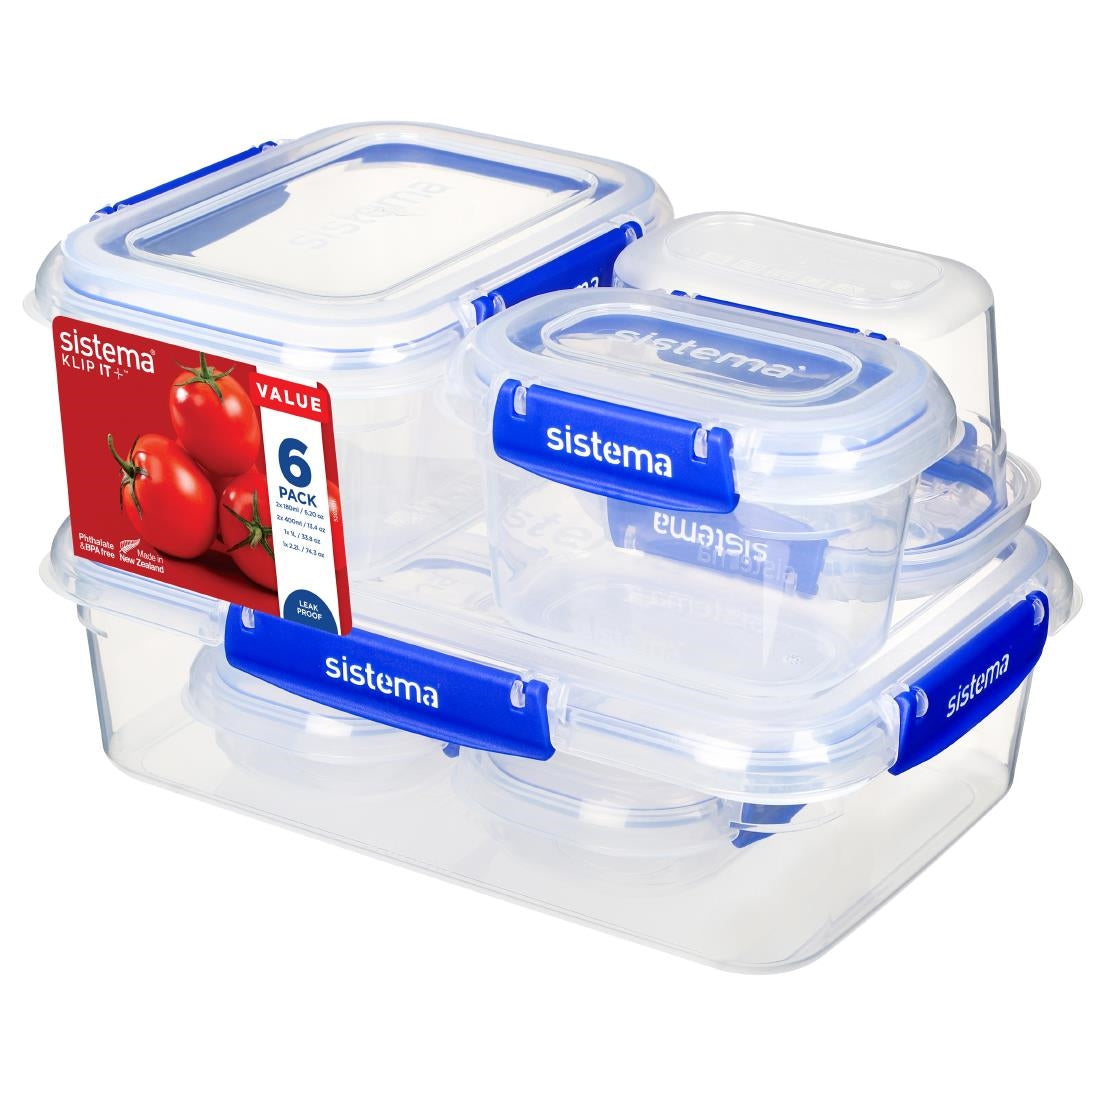 CH251 Sistema Klip It Plus Storage Container Multipack (Pack of 6) JD Catering Equipment Solutions Ltd